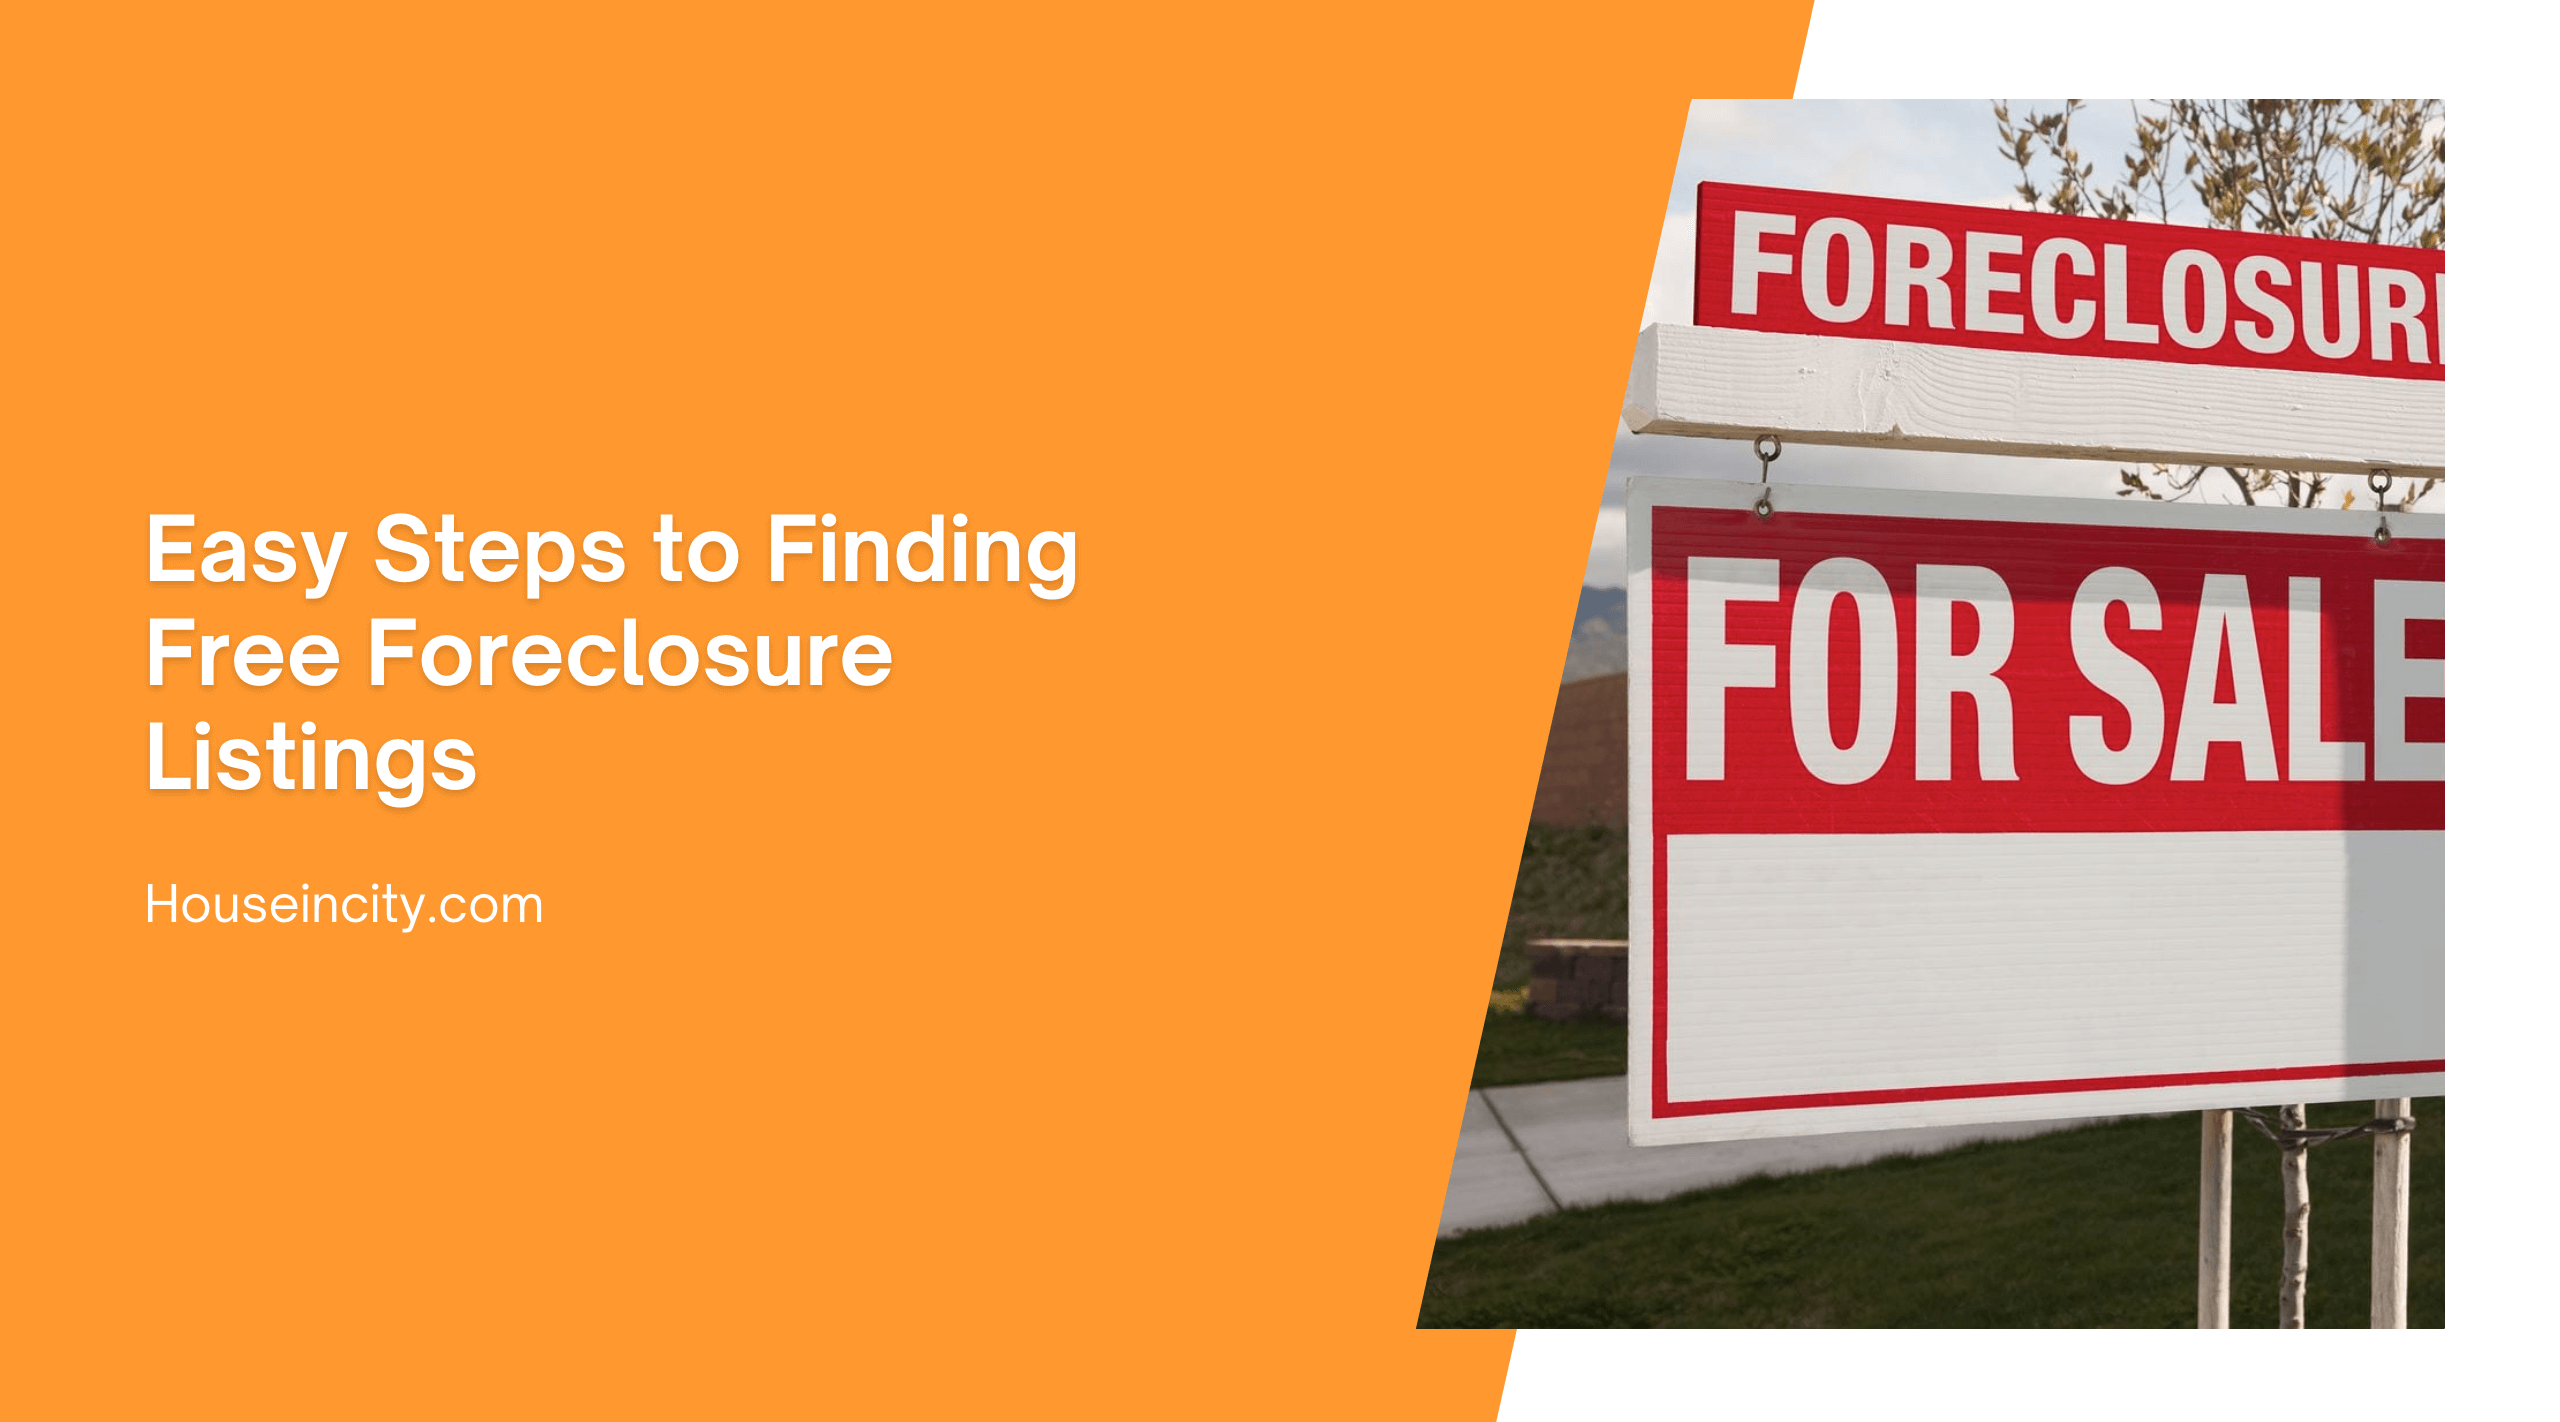 Easy Steps to Finding Free Foreclosure Listings